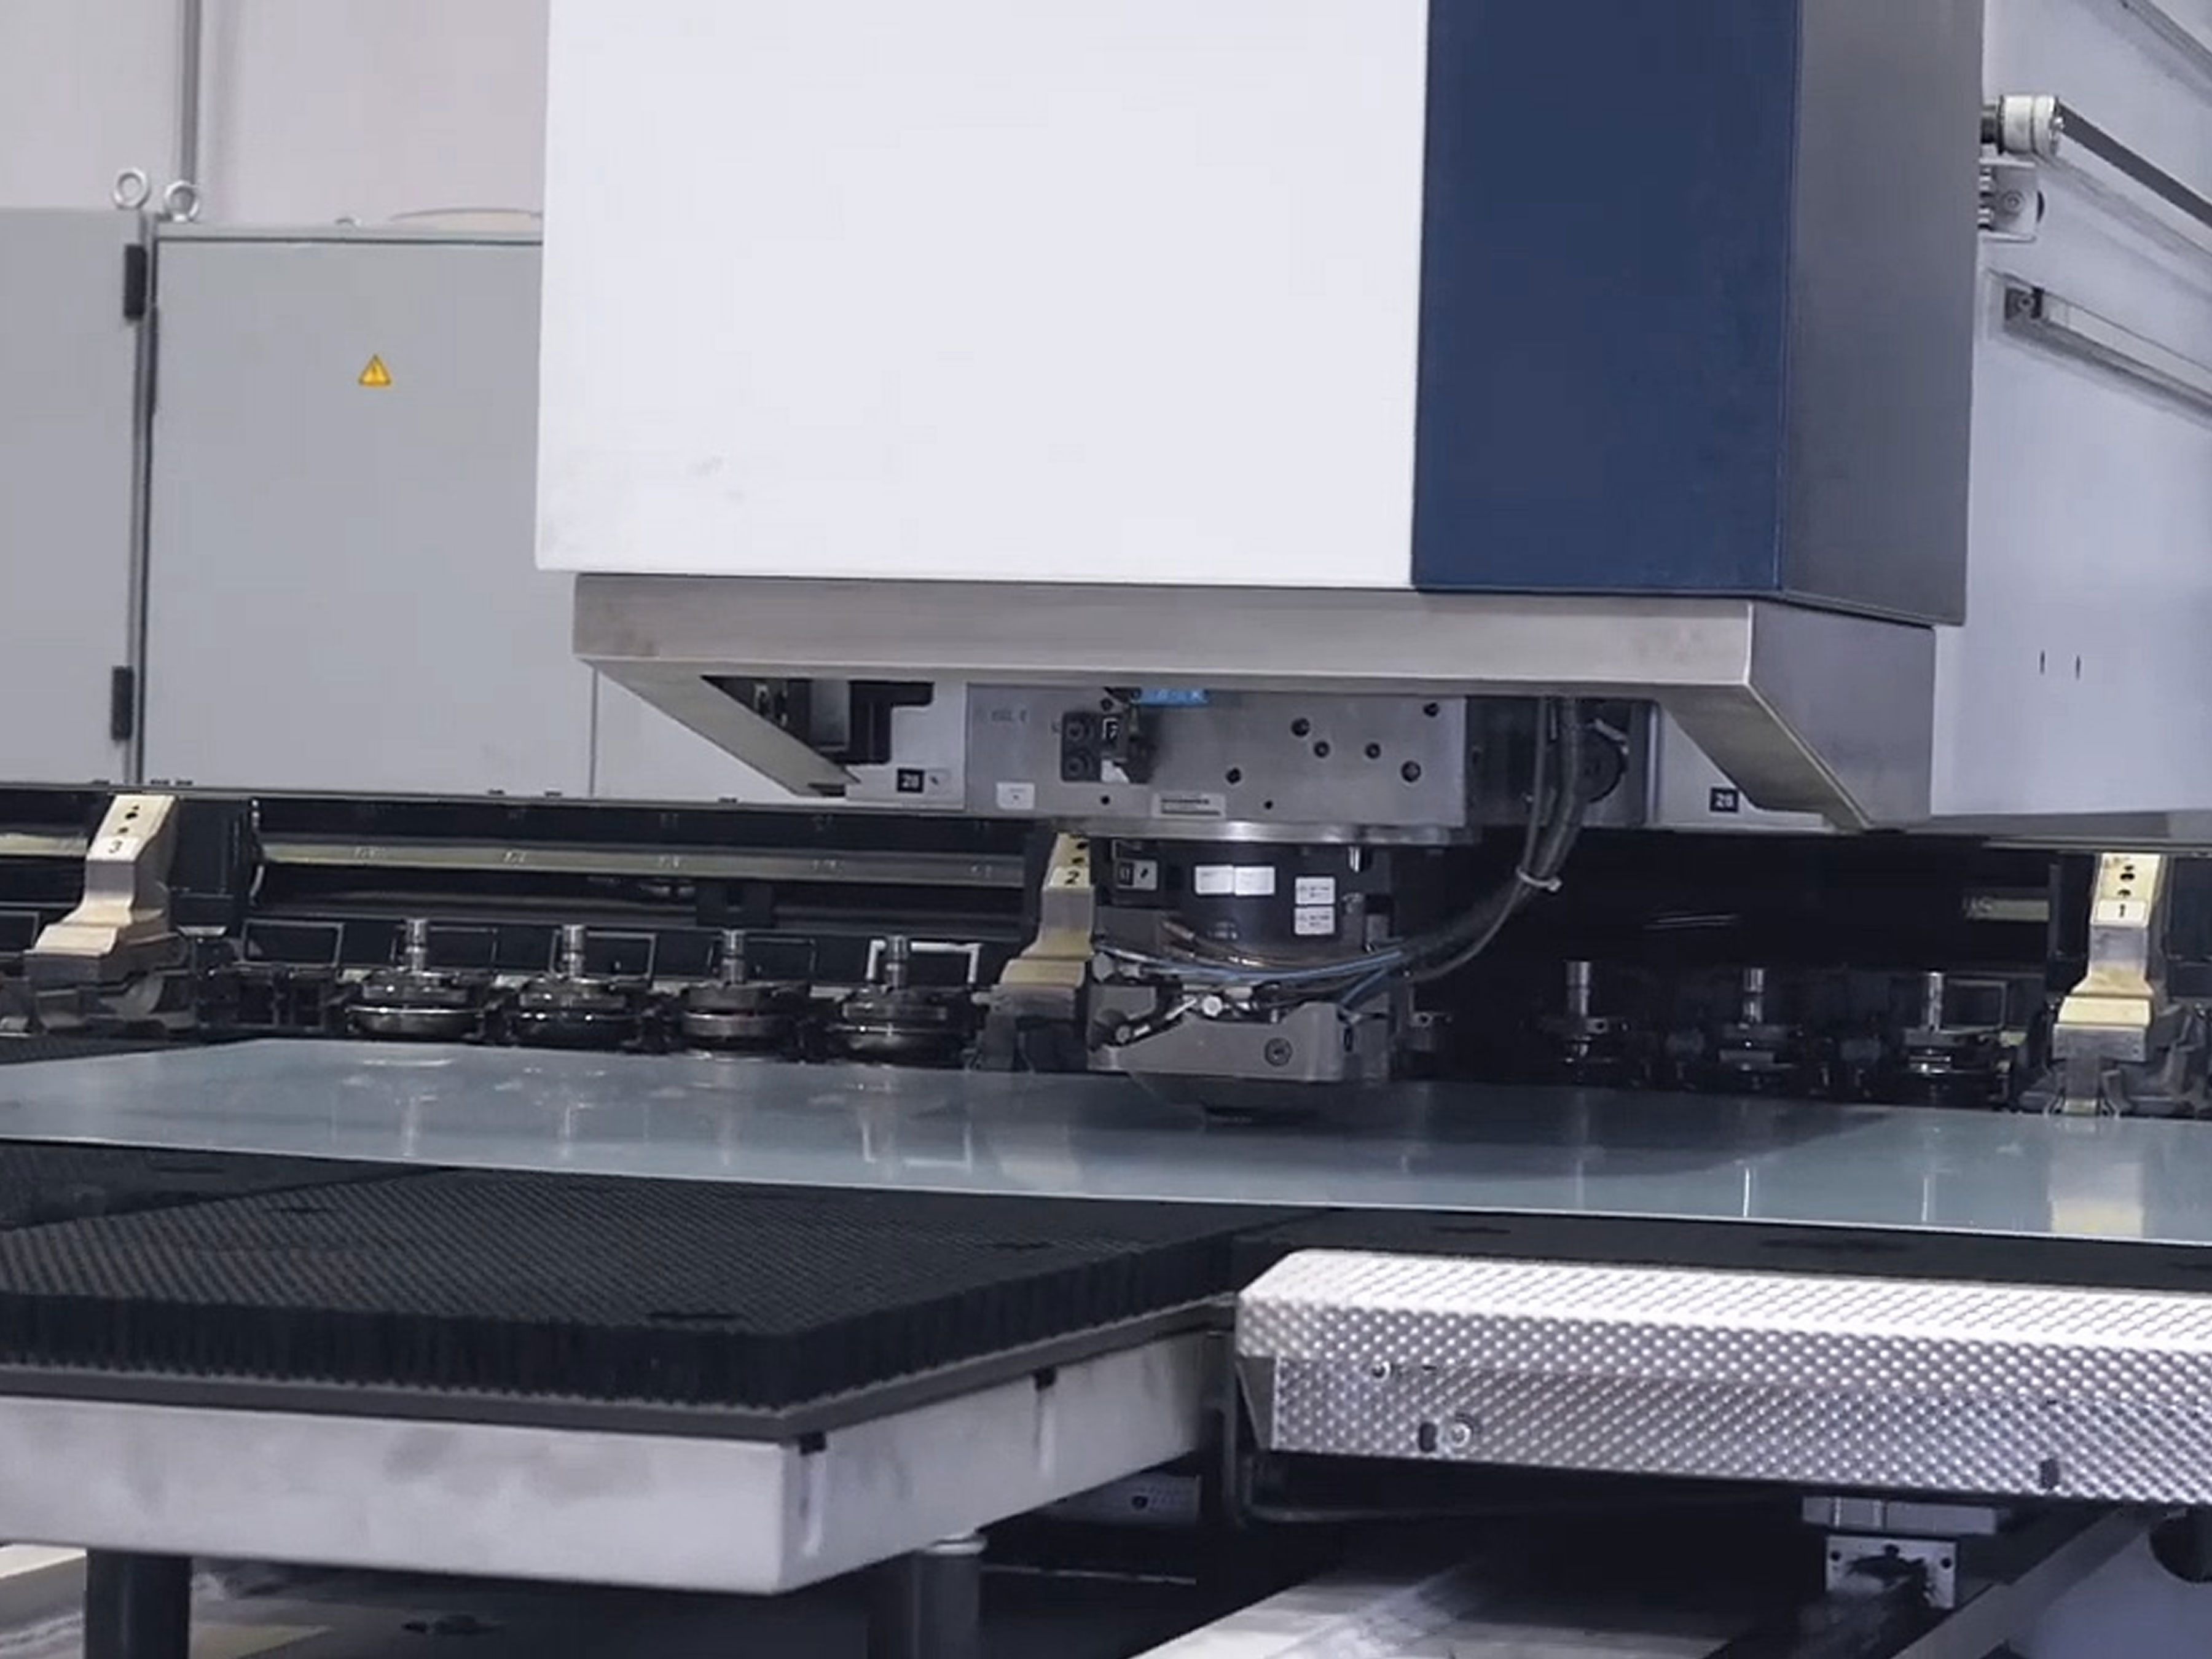 Hydram Sheet Metalwork's automated vision system